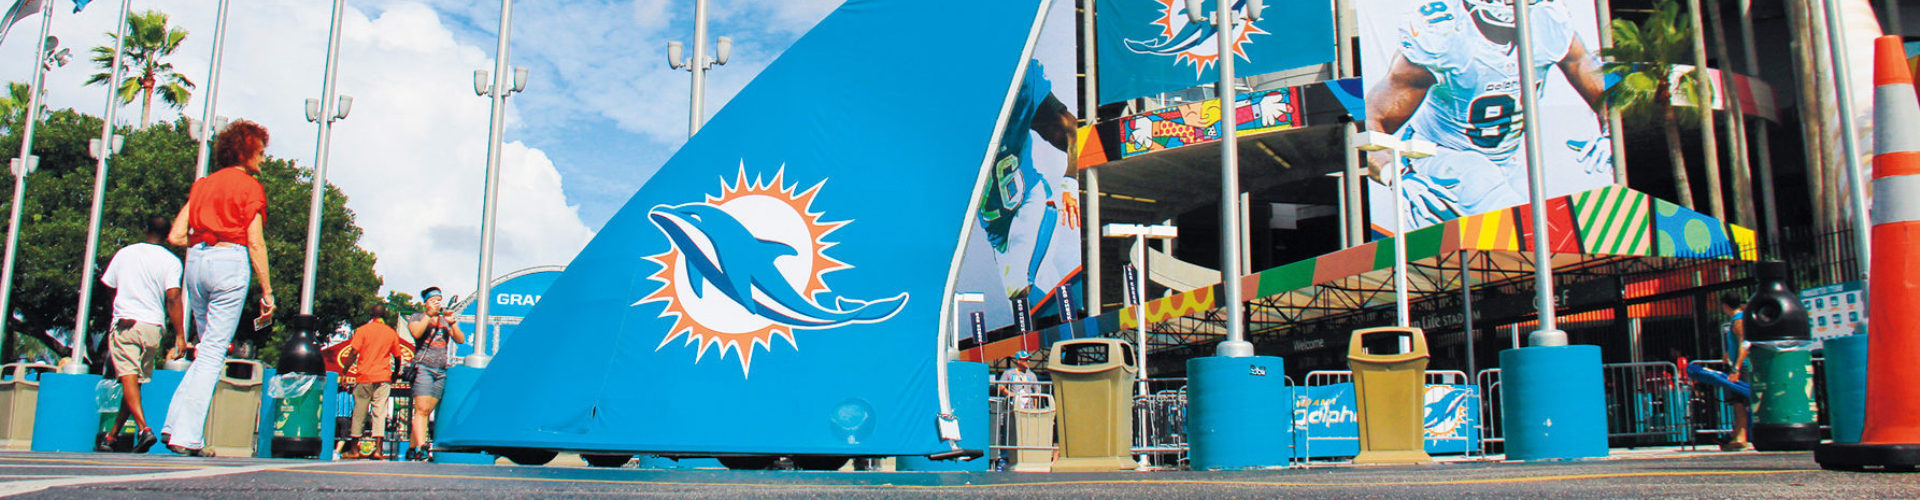 Miami Dolphins Fanfest 213 Brighter